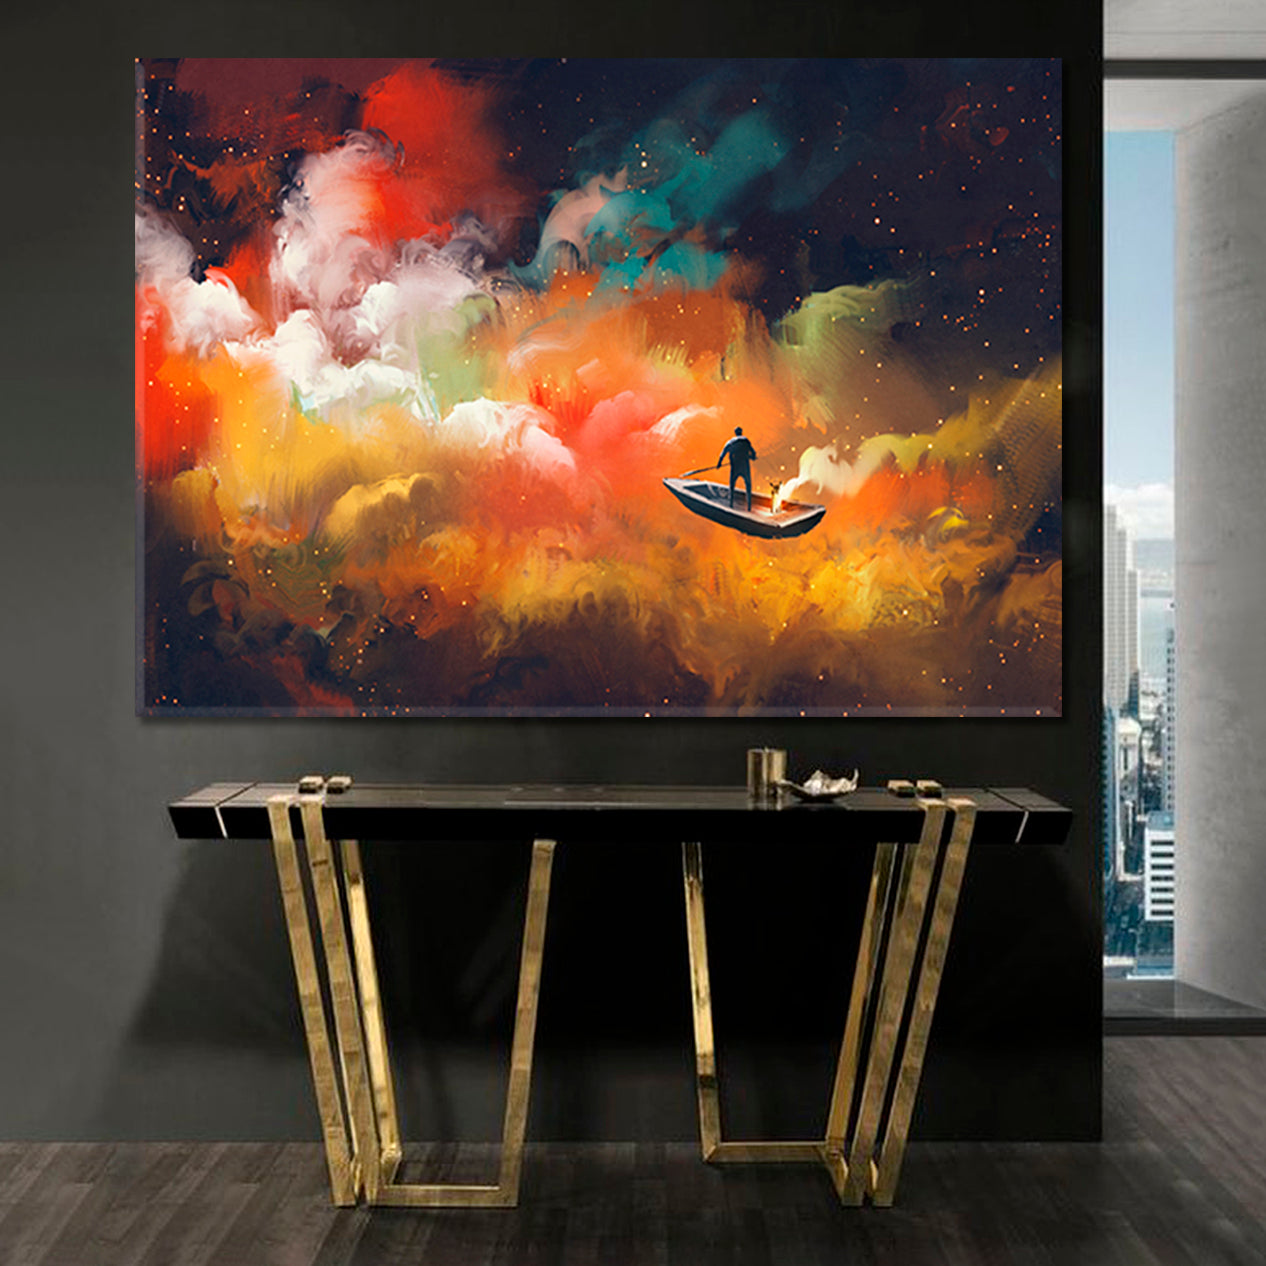 Surreal Dreamlike Man on Boat Outer Space Colorful Clouds Surreal Fantasy Large Art Print Décor Artesty   